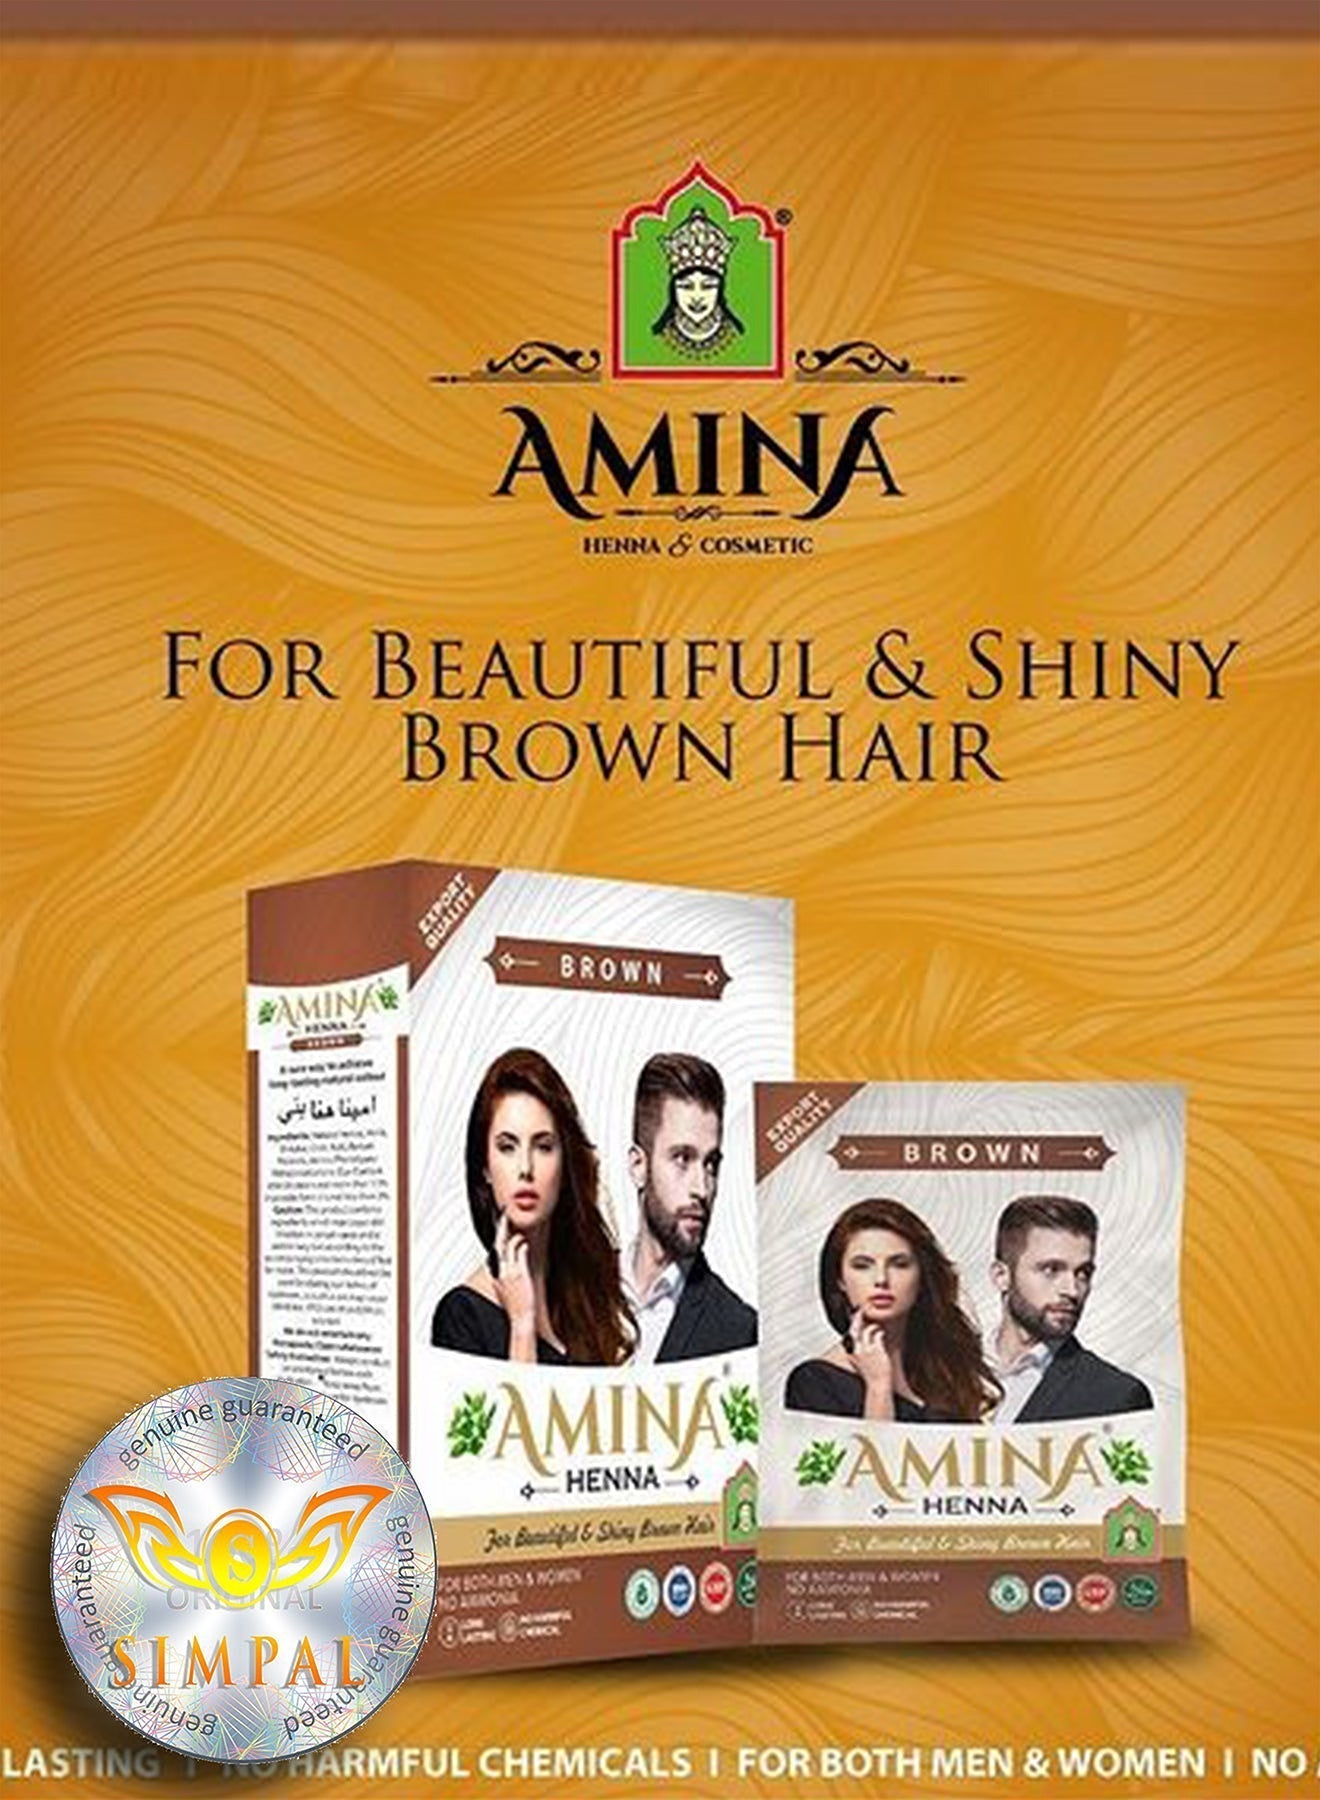 Amina Henna Natural Color Brown 10g x 6 pouch Value Pack of 2 